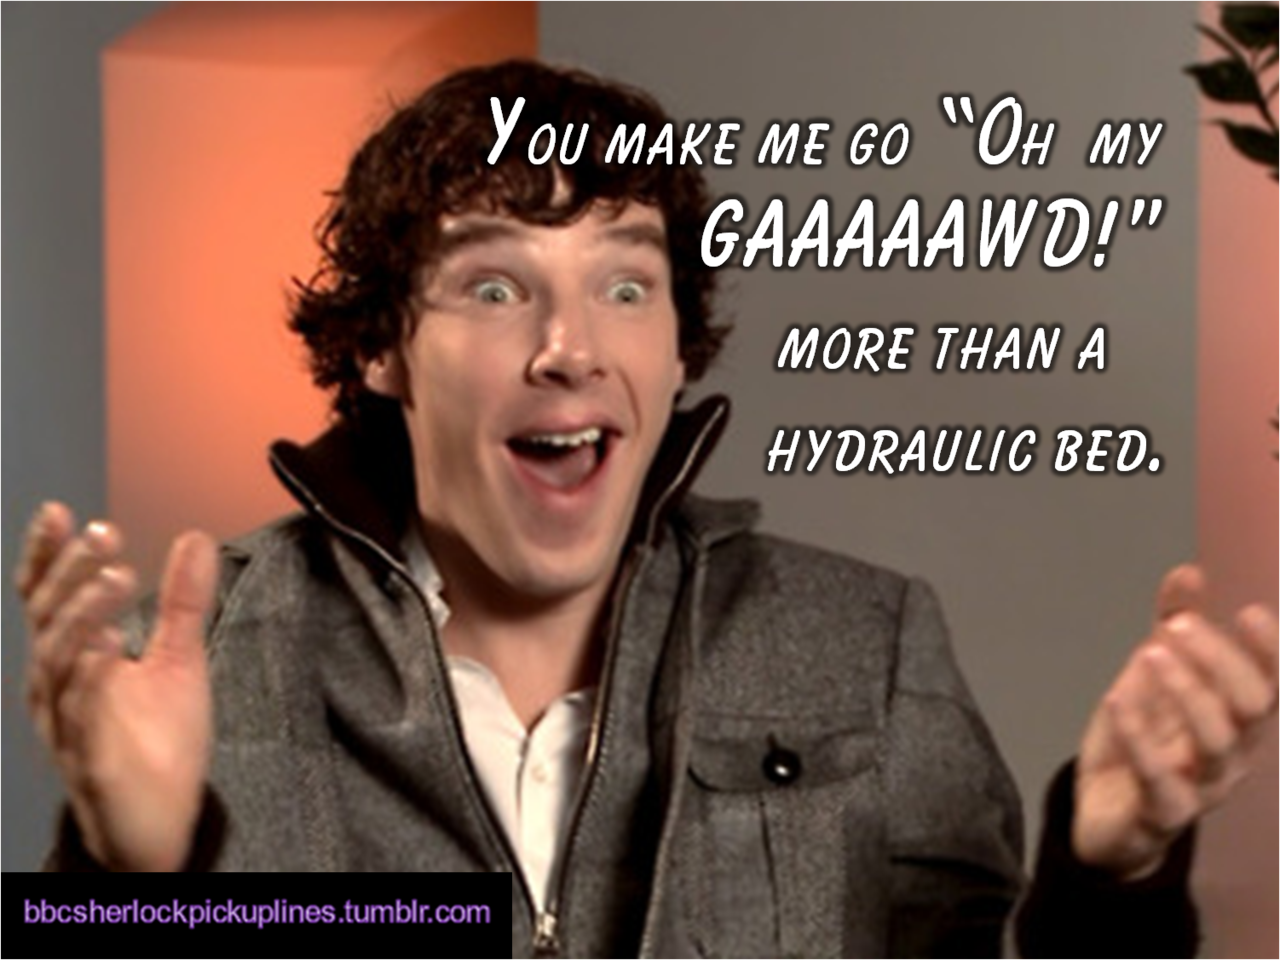 The best of breaking the fourth wall, from BBC Sherlock pick-up lines.